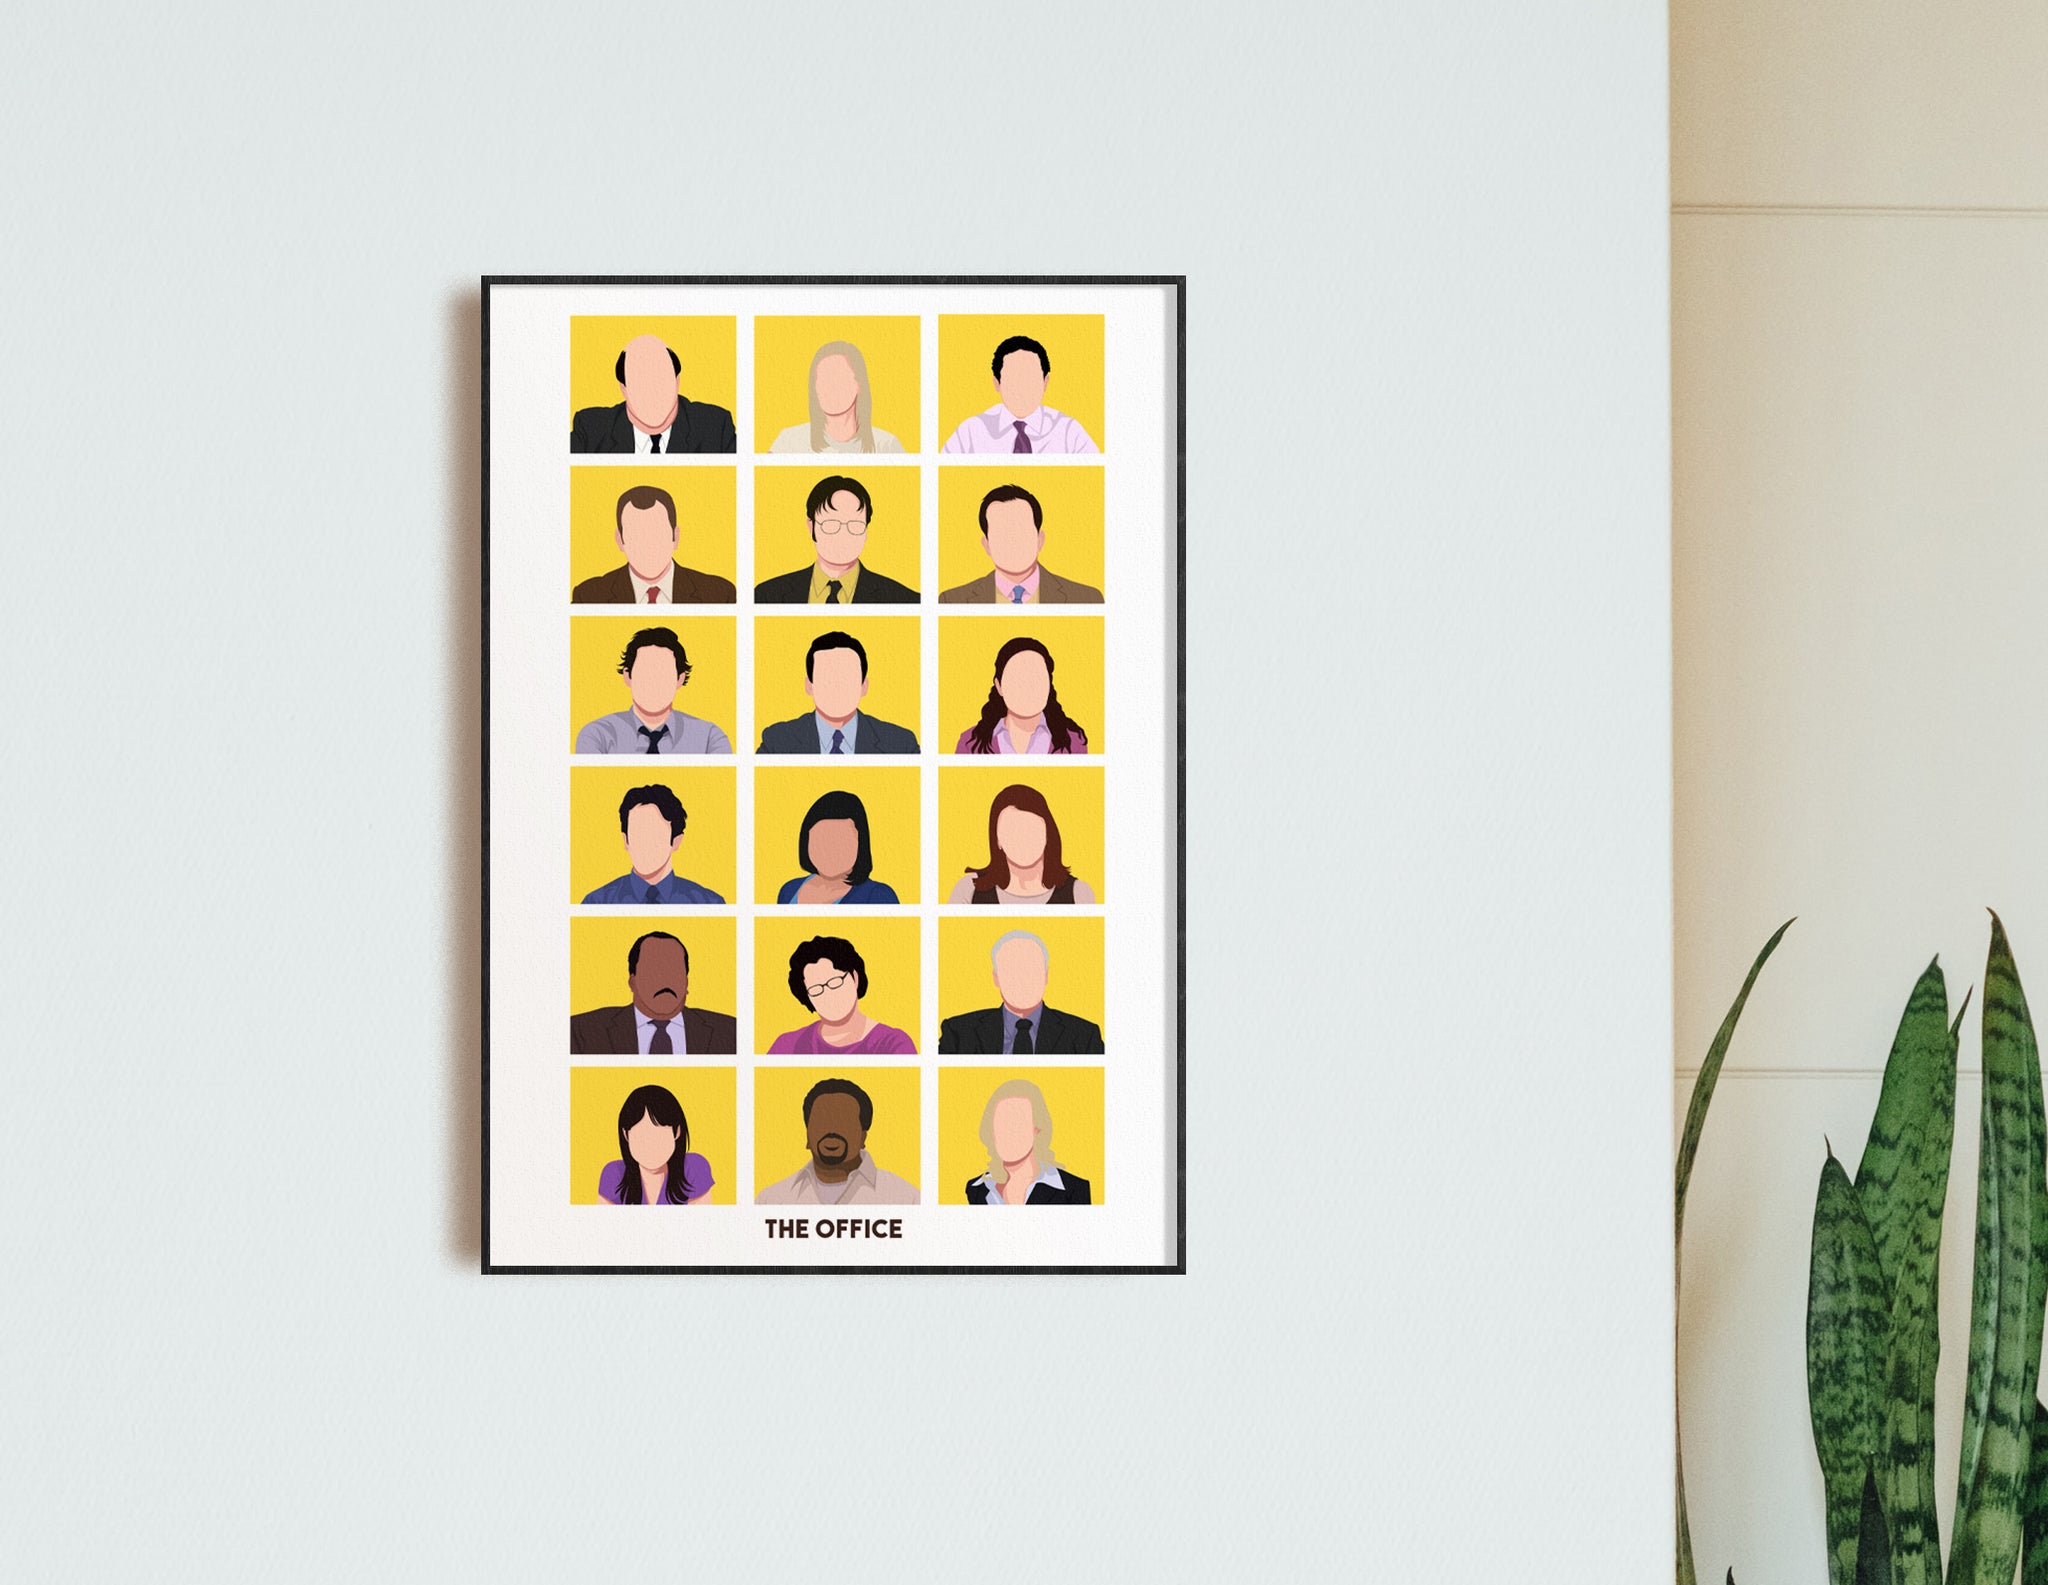 The Office (US) Cast Print - Minimal The Office Poster